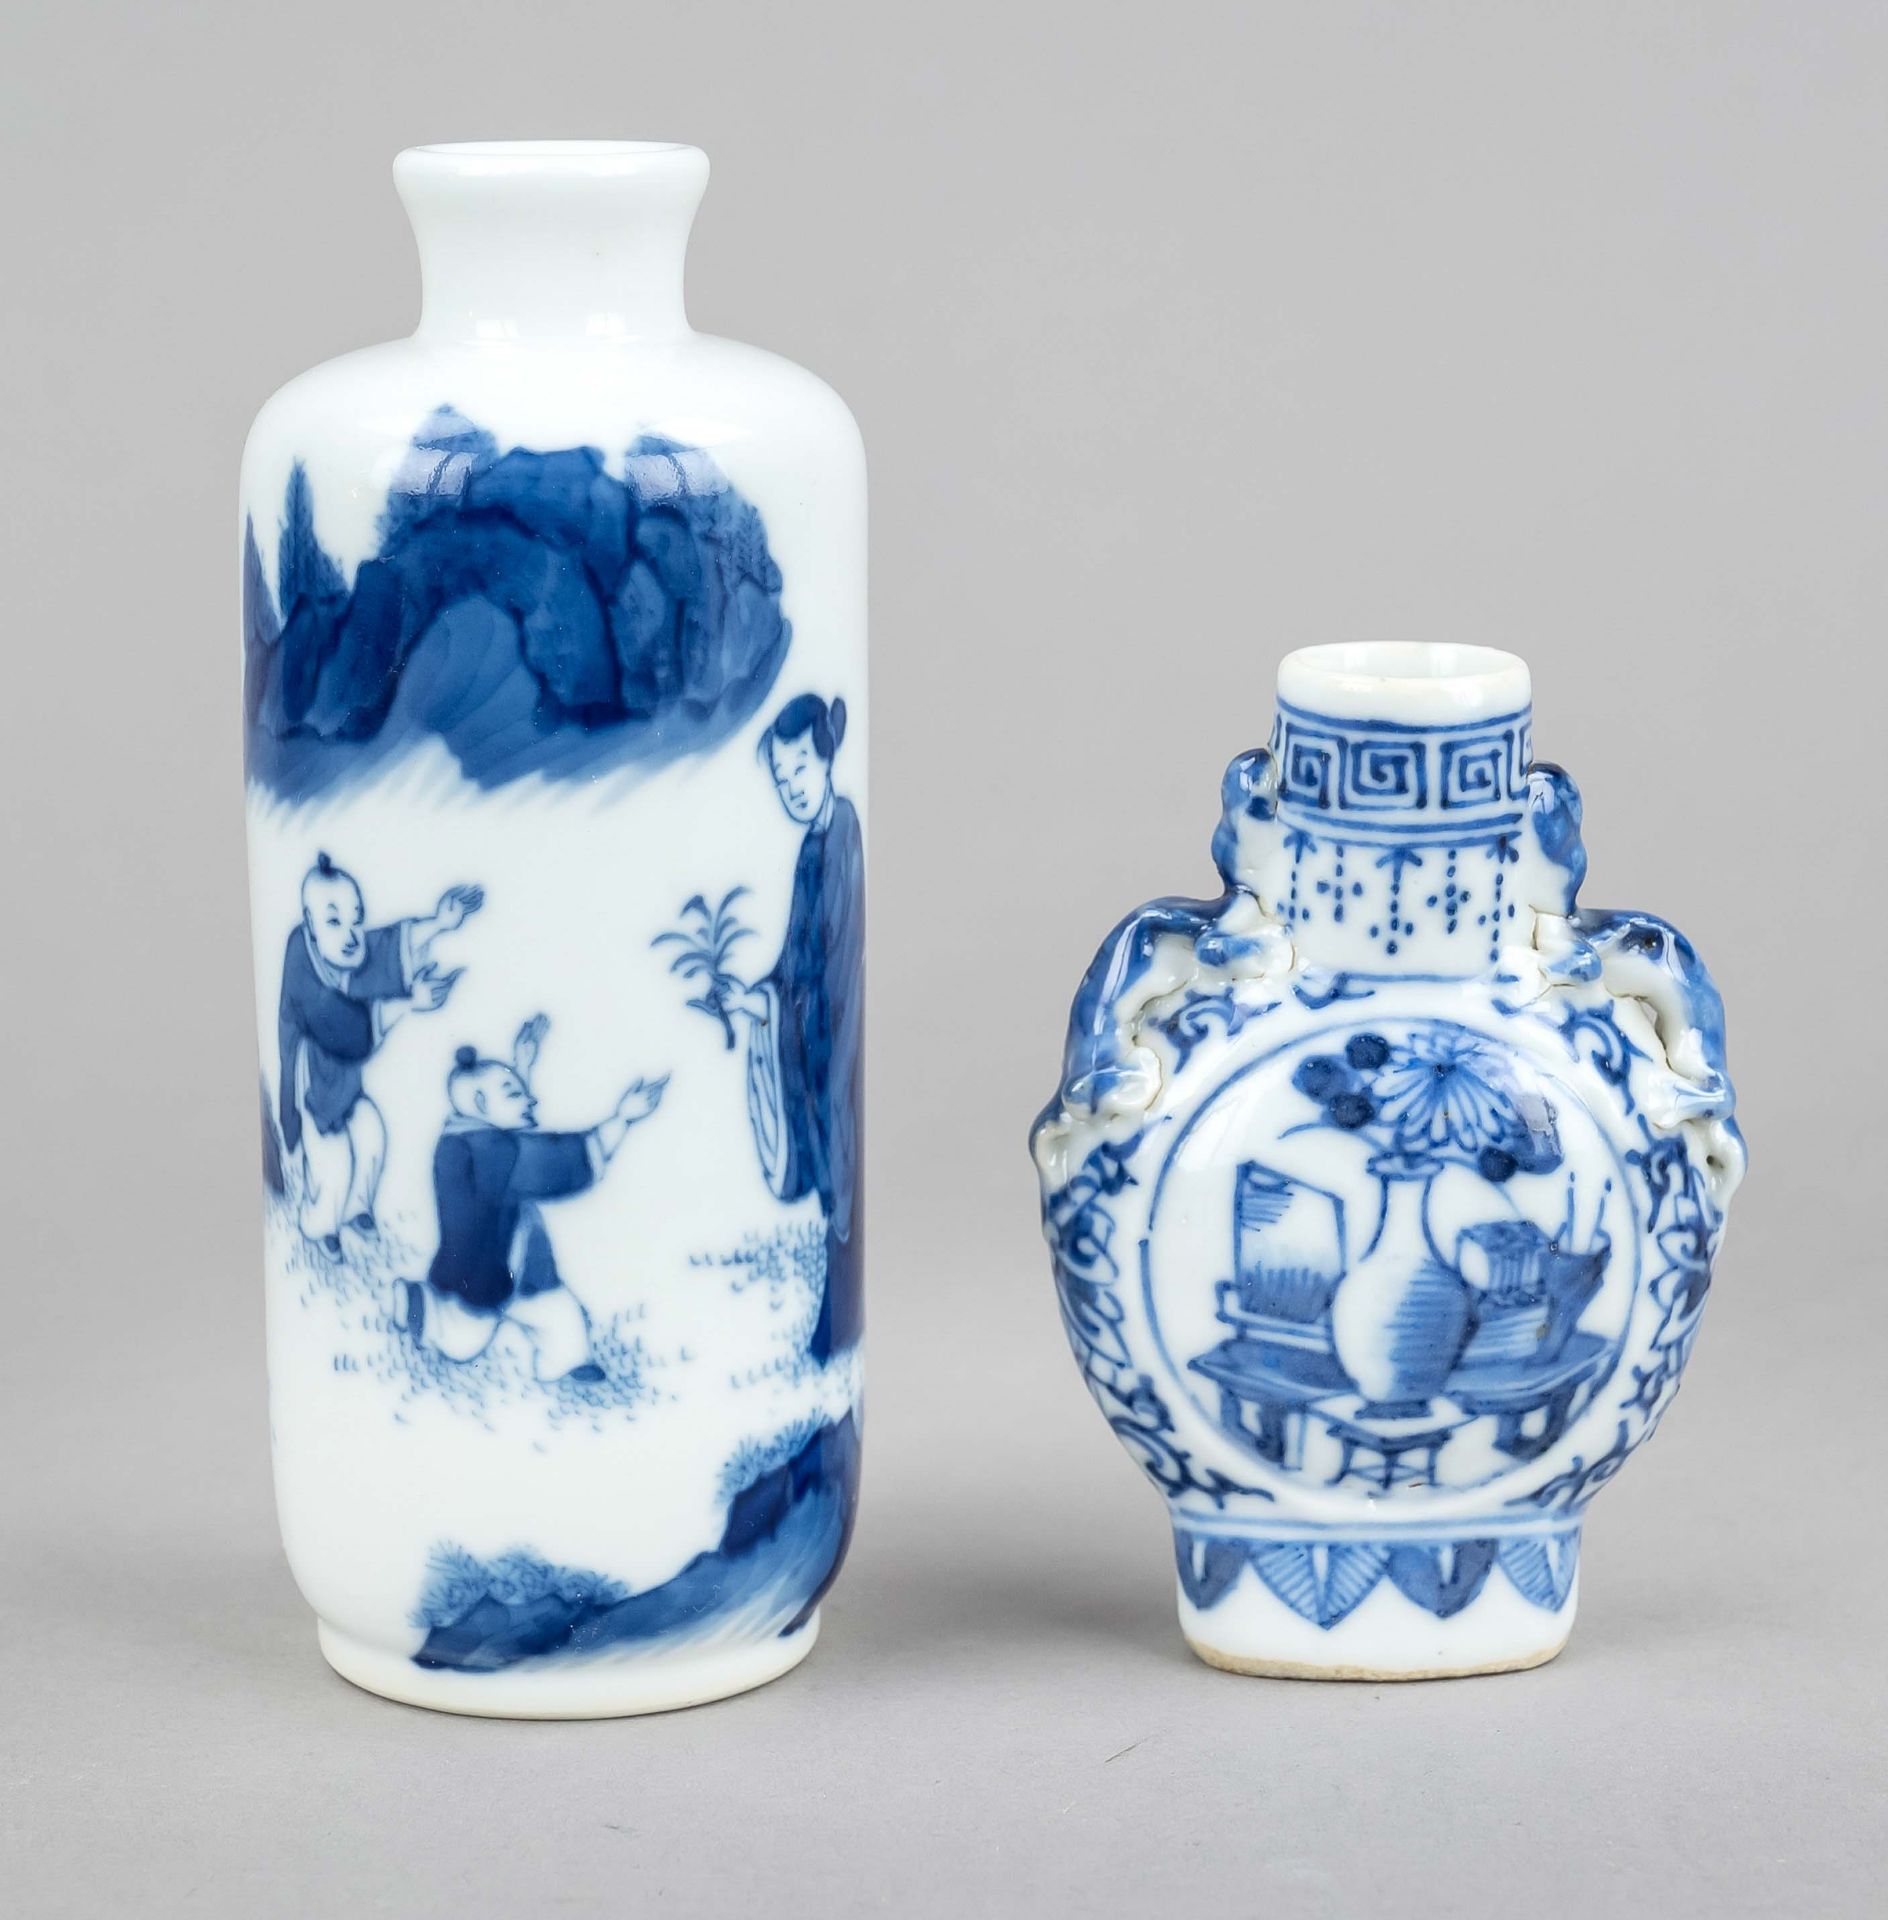 2 Blue and white vases, China, Qing dynasty(1644-1911), 18th/19th century, porcelain with cobalt